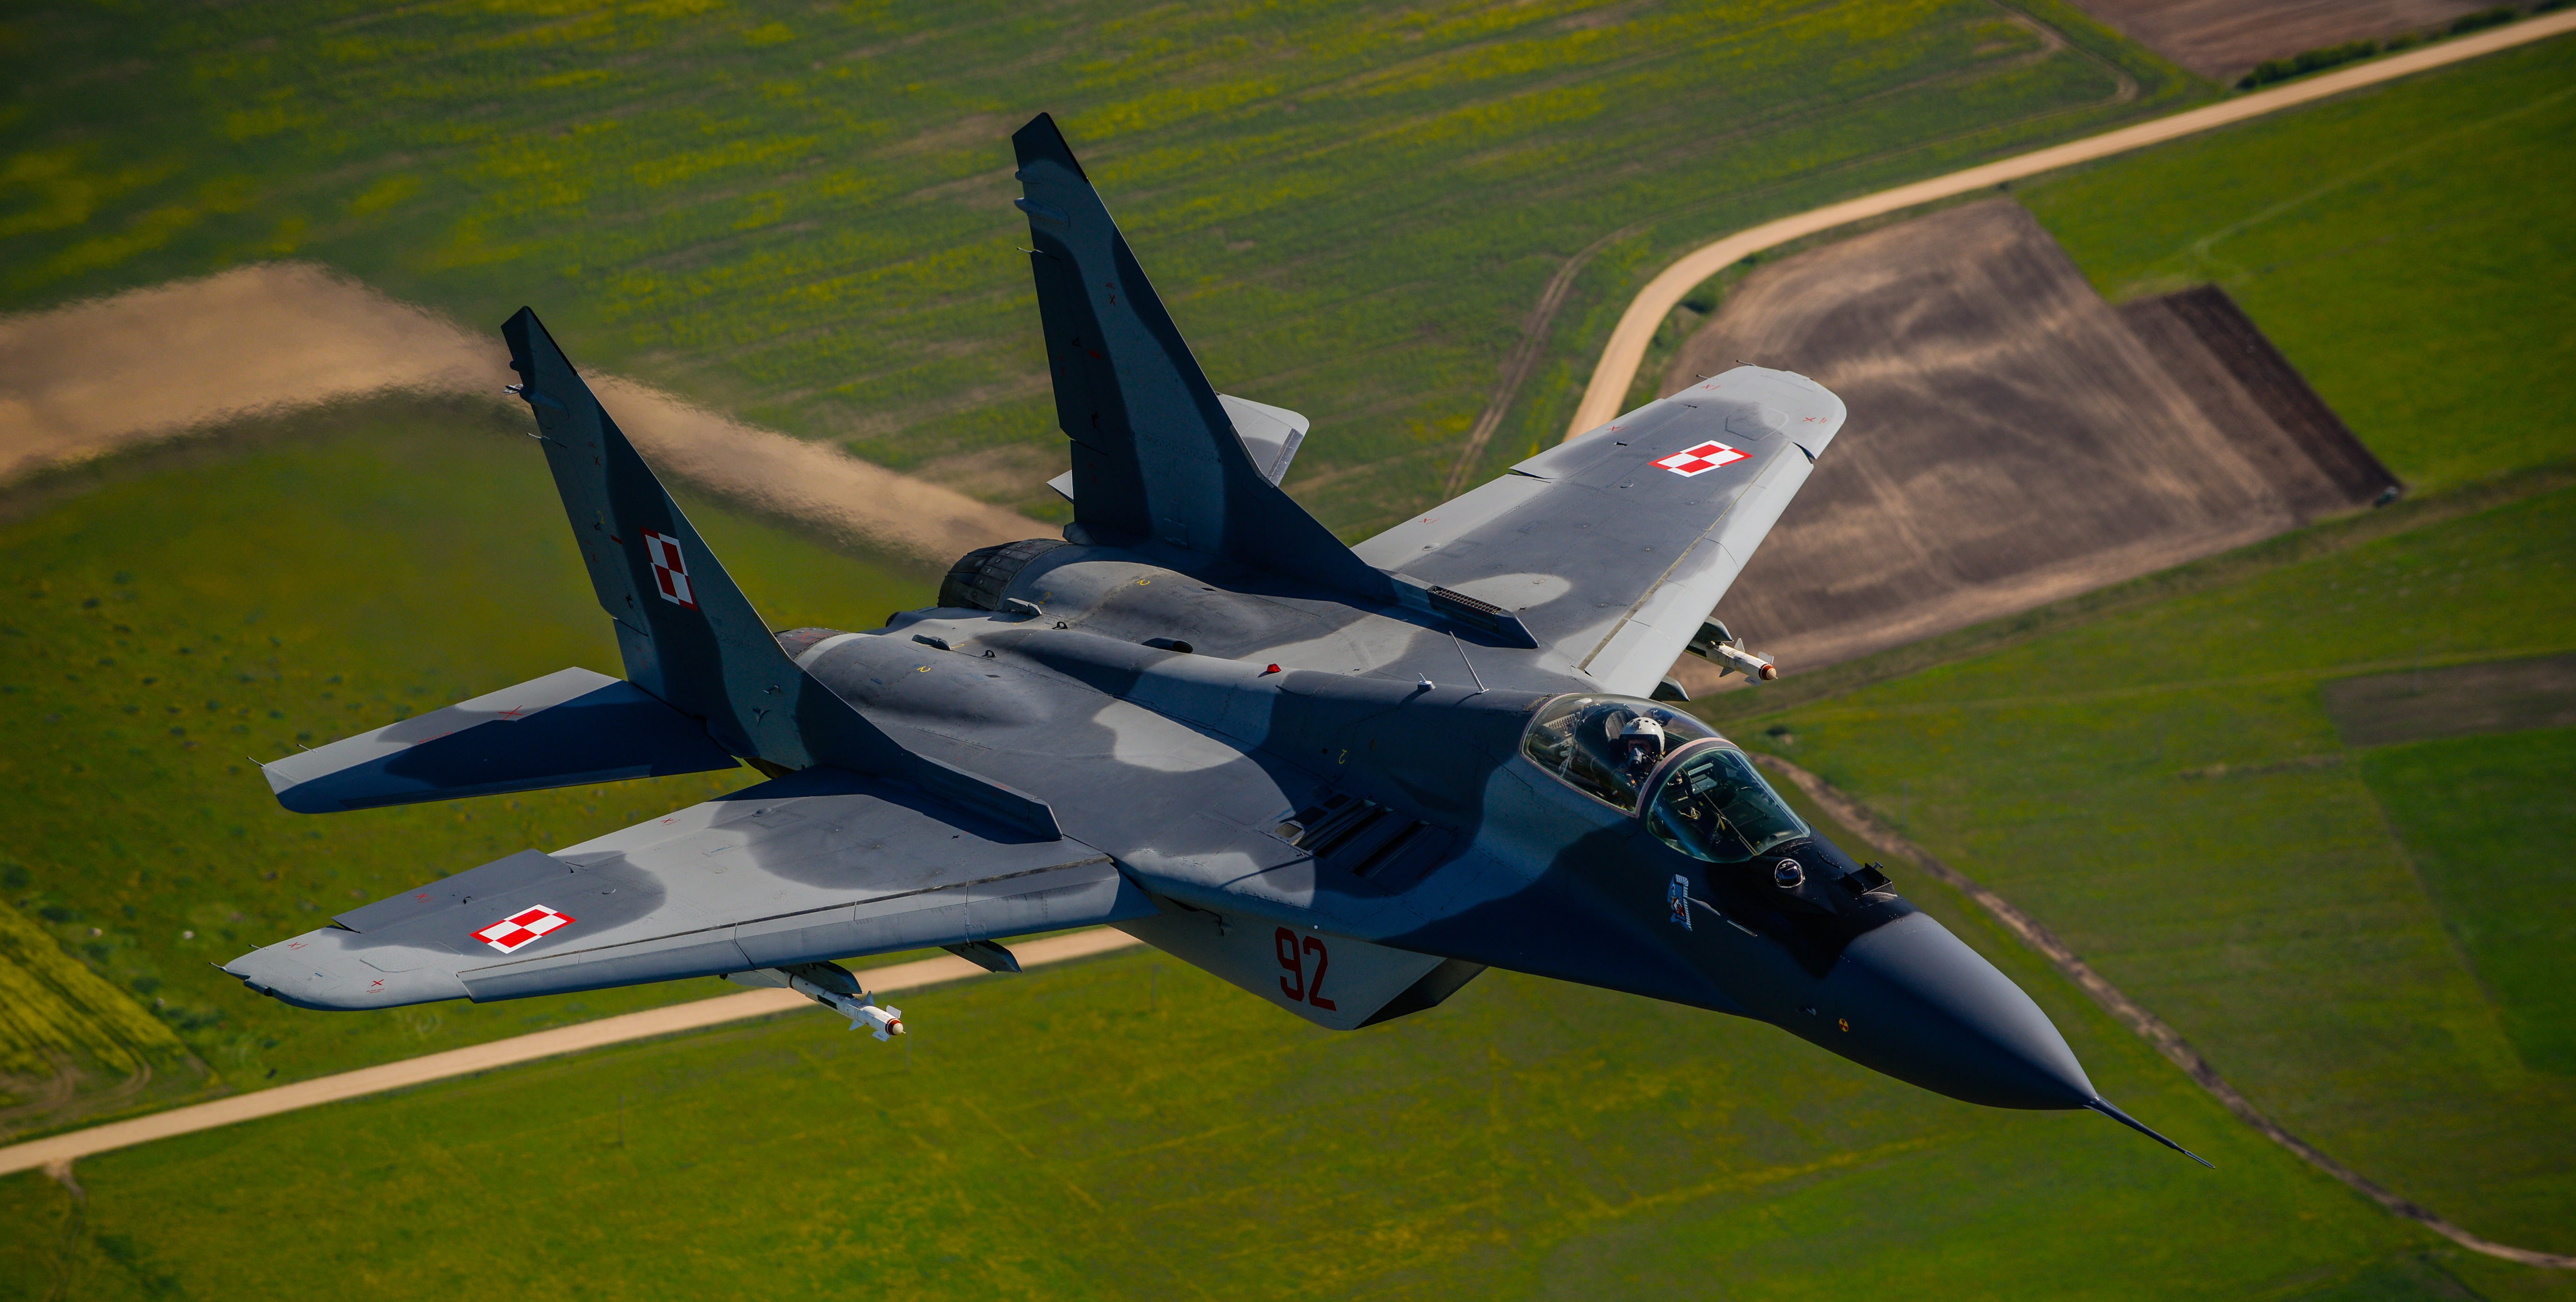 Poland will transfer 4 MiG-29 fighter jets to Ukraine in the coming days, Polish president says 